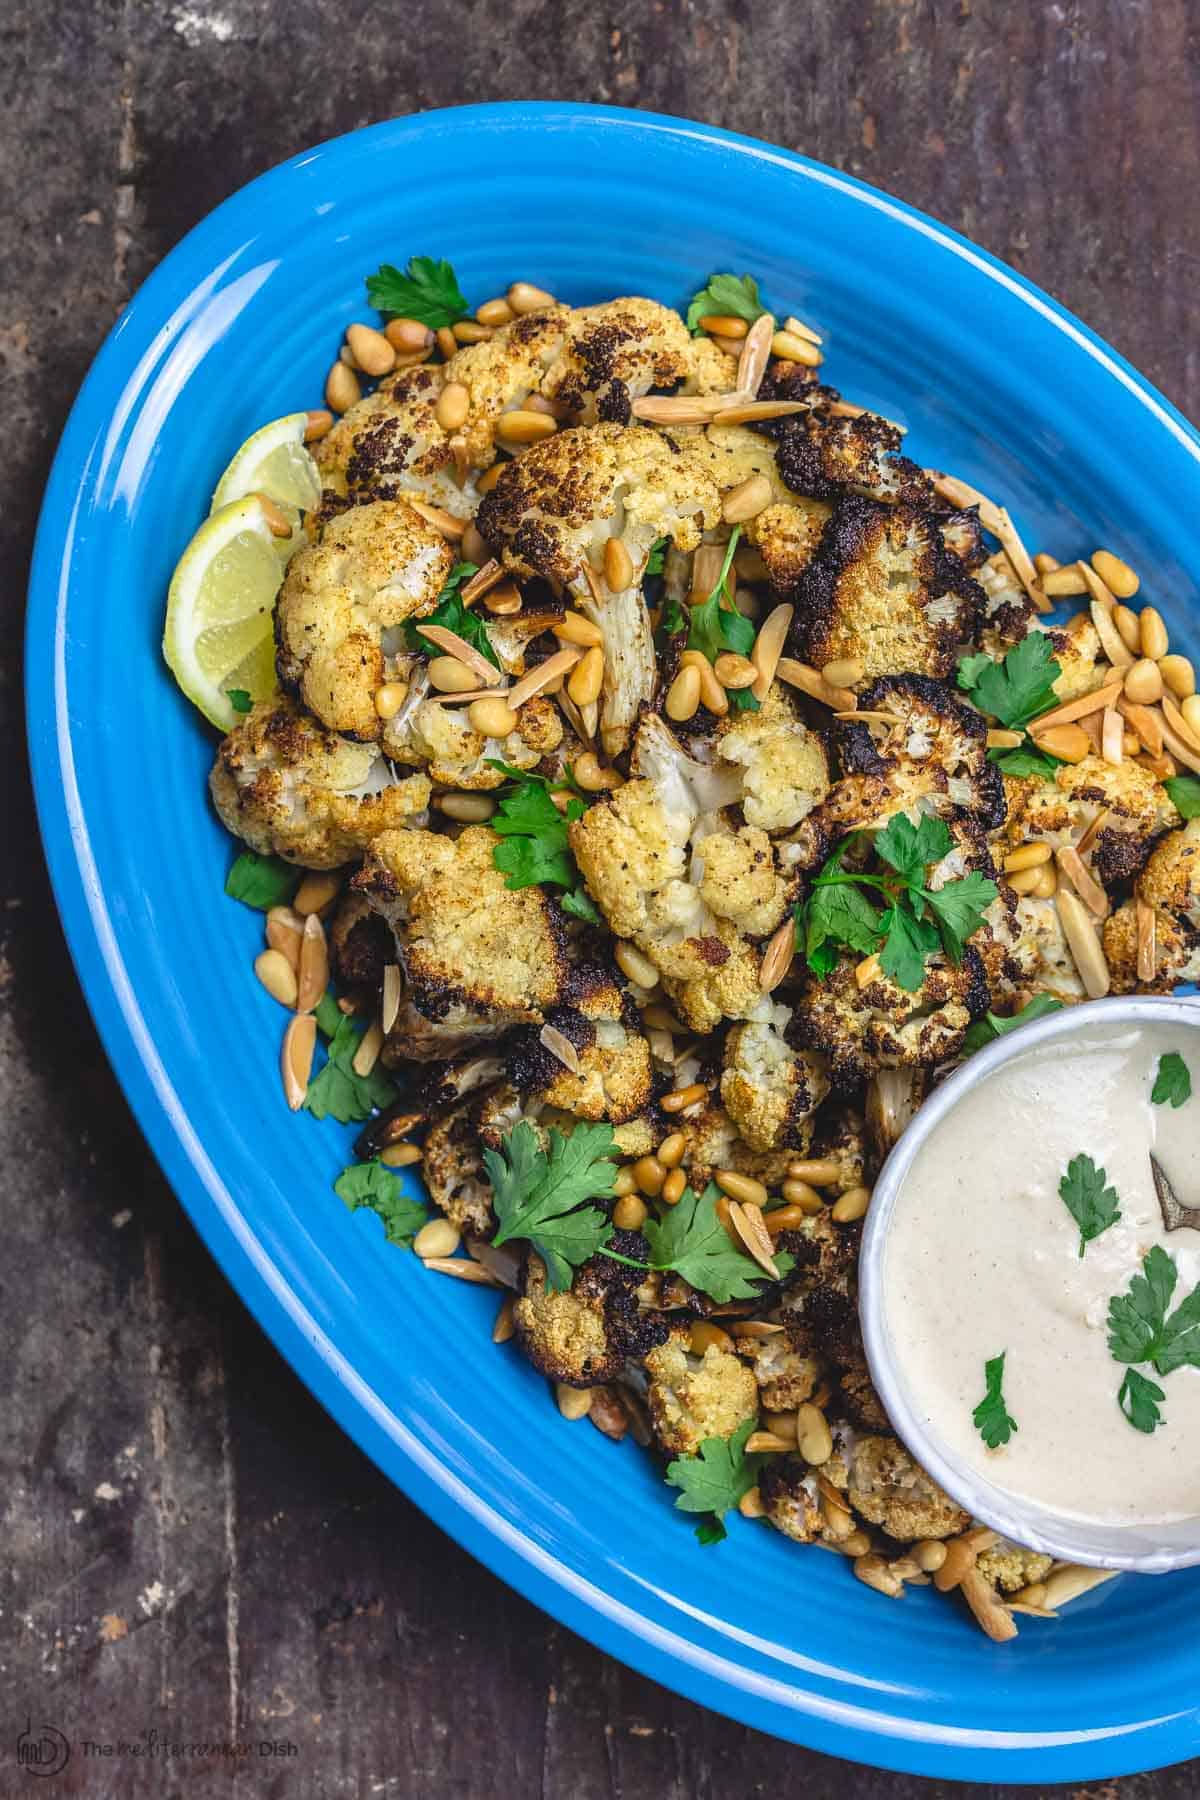 Best Roasted Cauliflower with cumin and lemon. Served on a large platter and garnished with toasted nuts, and parsley. A side of tahini sauce for dipping